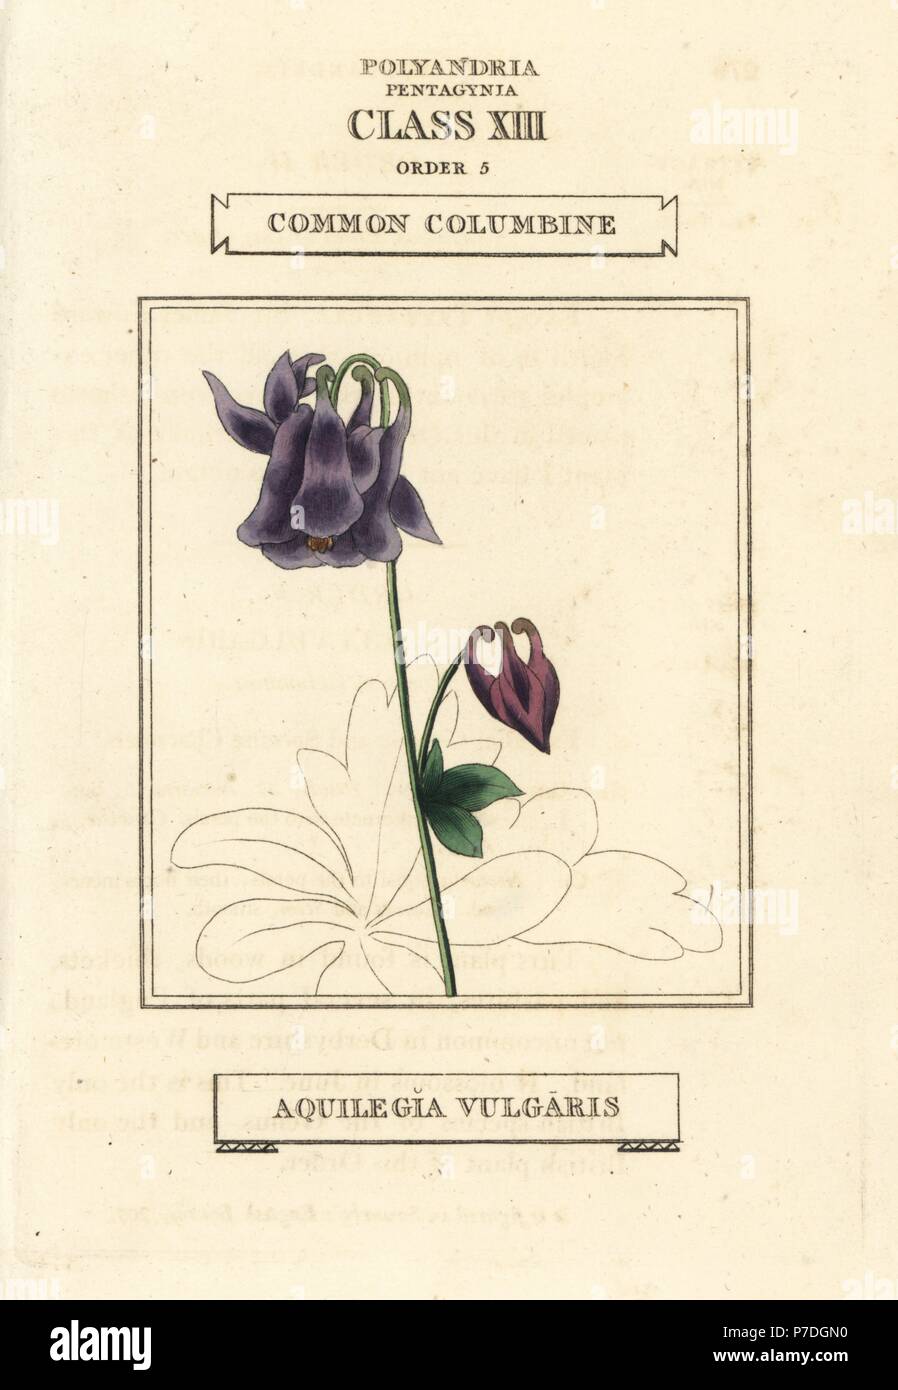 Common columbine, Aquilegia vulgaris. Handcoloured copperplate engraving after an illustration by Richard Duppa from his The Classes and Orders of the Linnaean System of Botany, Longman, Hurst, London, 1816. Stock Photo